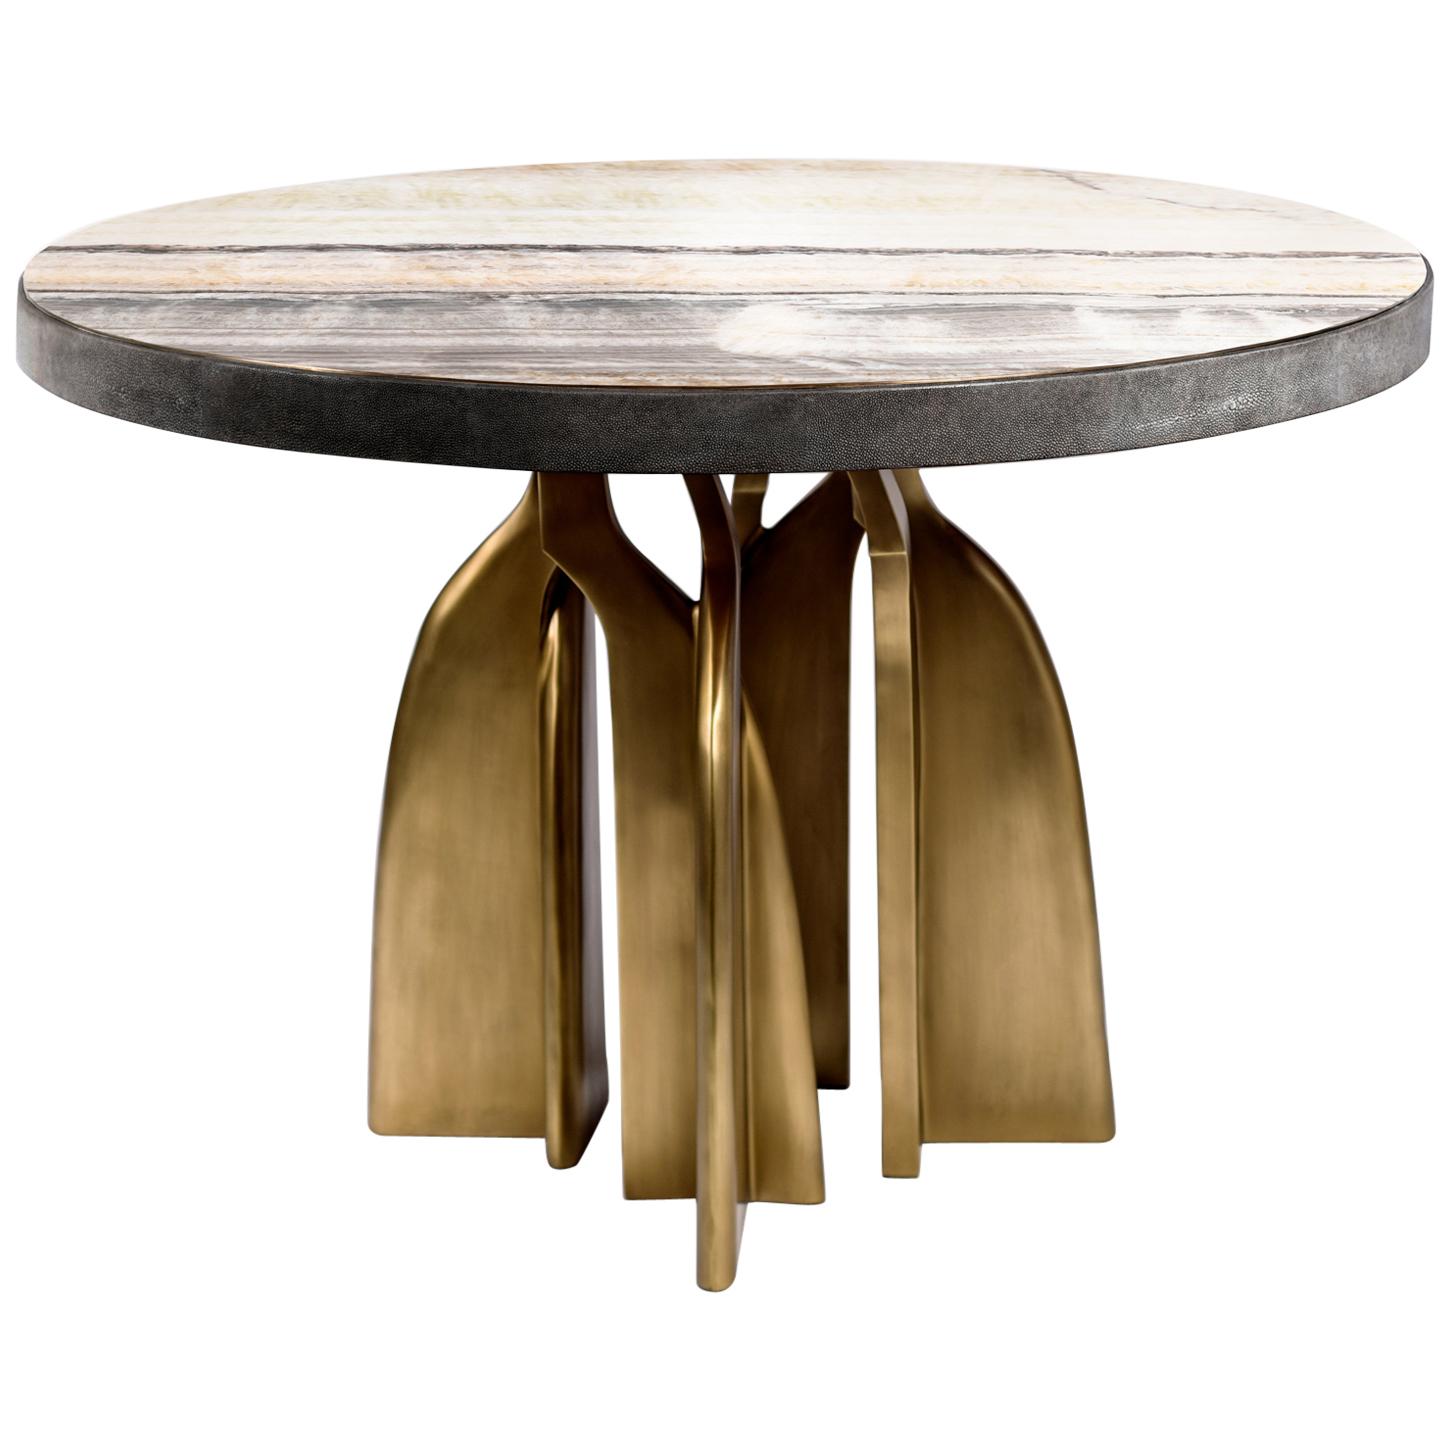 "Chital" Breakfast Table in Coal Black Shagreen, Onyx and Brass by Kifu, Paris For Sale